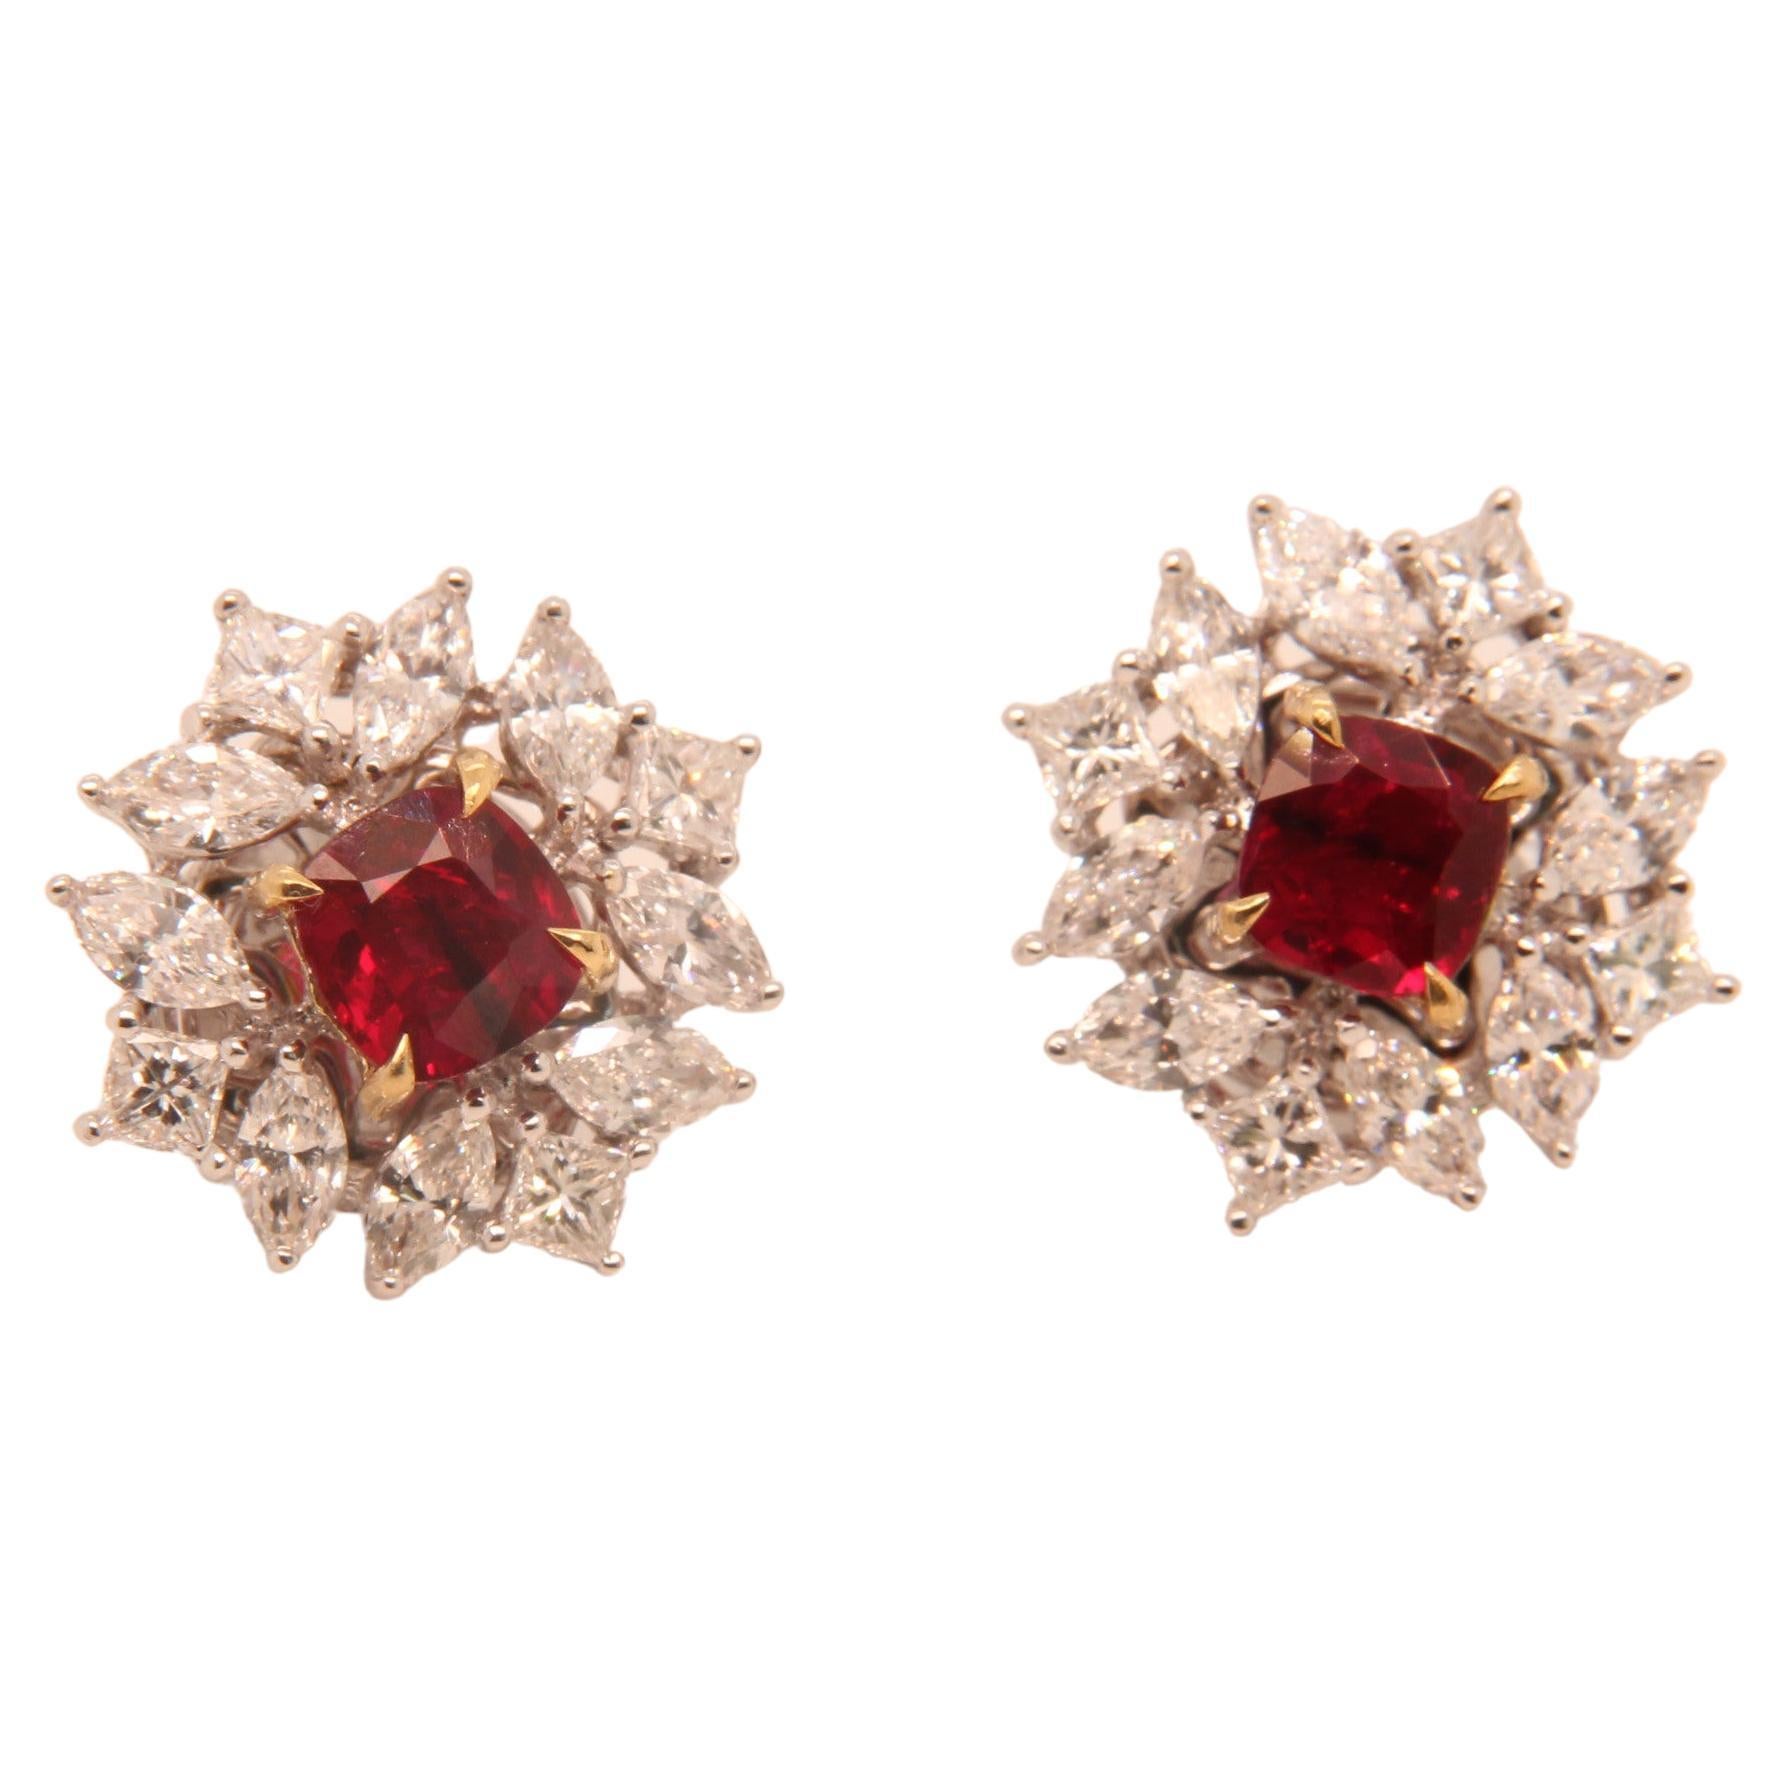 A brand new ruby and diamond earring by Rewa. The Burmese 'Pigeon Blood' ruby weigh 1.11 and 1.00 carat each and they are both certified by Gem Research Swisslab (GRS). The rubies are surrounded by 2.22 carat diamonds studded on 18k white gold 6.44